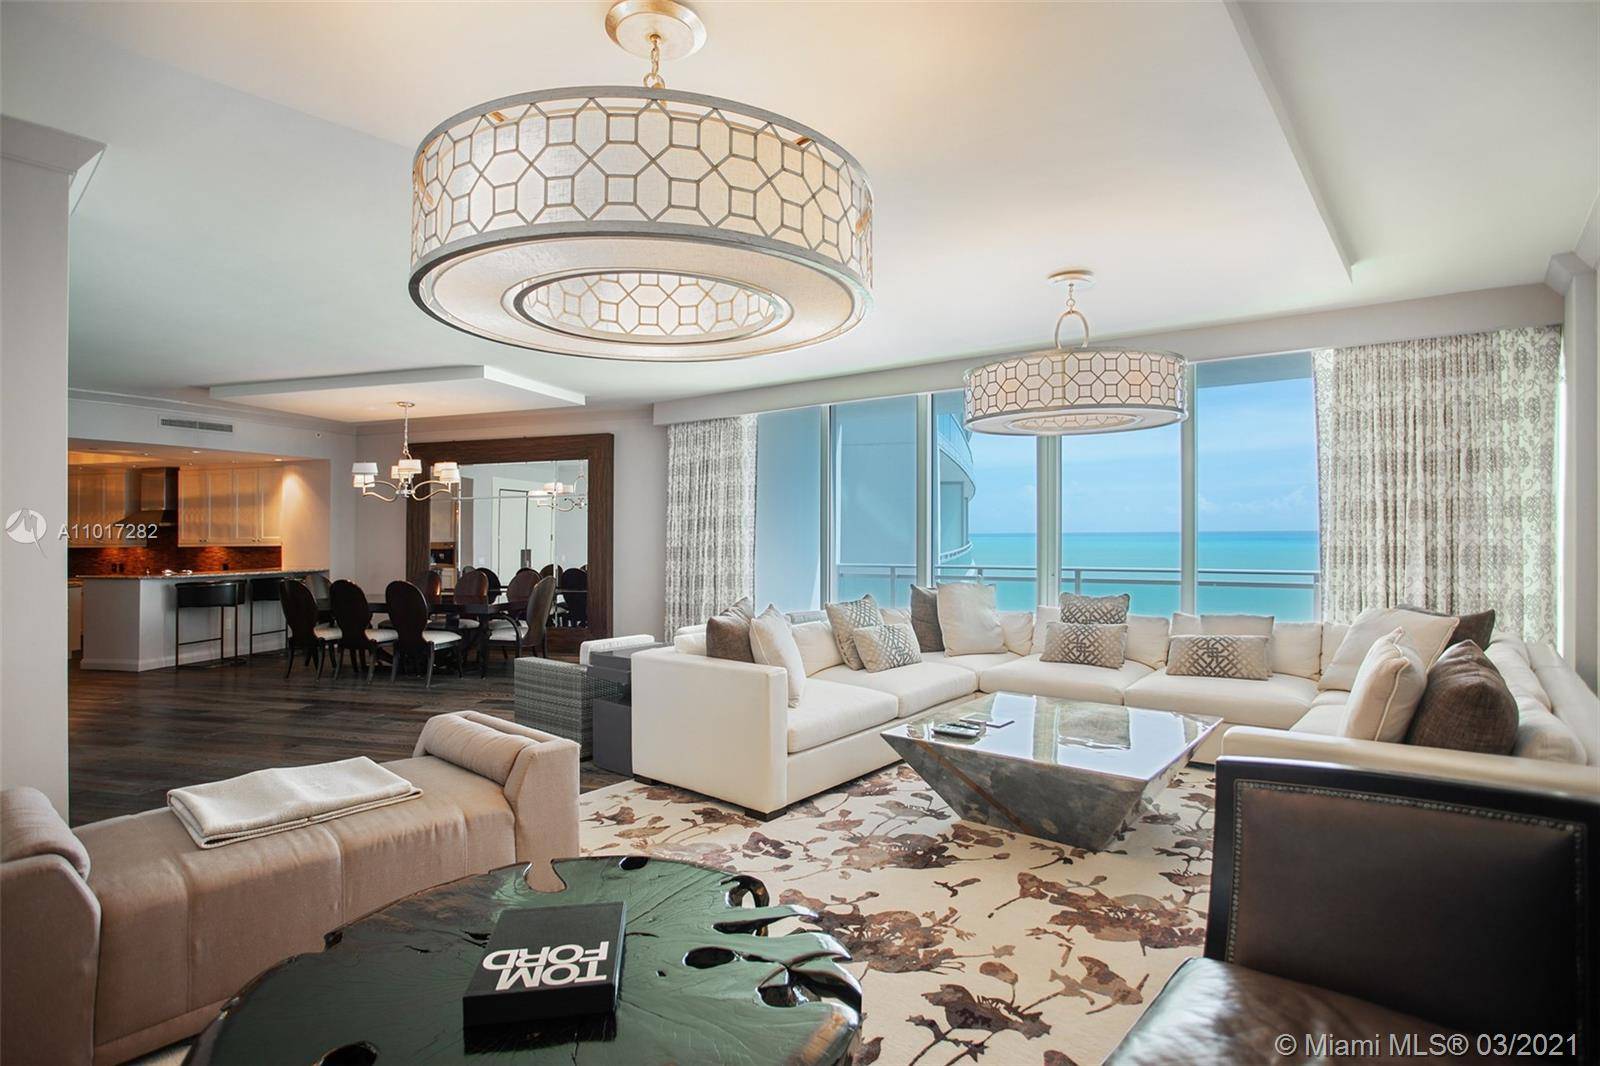 Beautiful 3 bedroom 3. 5 bath ocean front residence, several blocks away from Bal Harbour Shops.